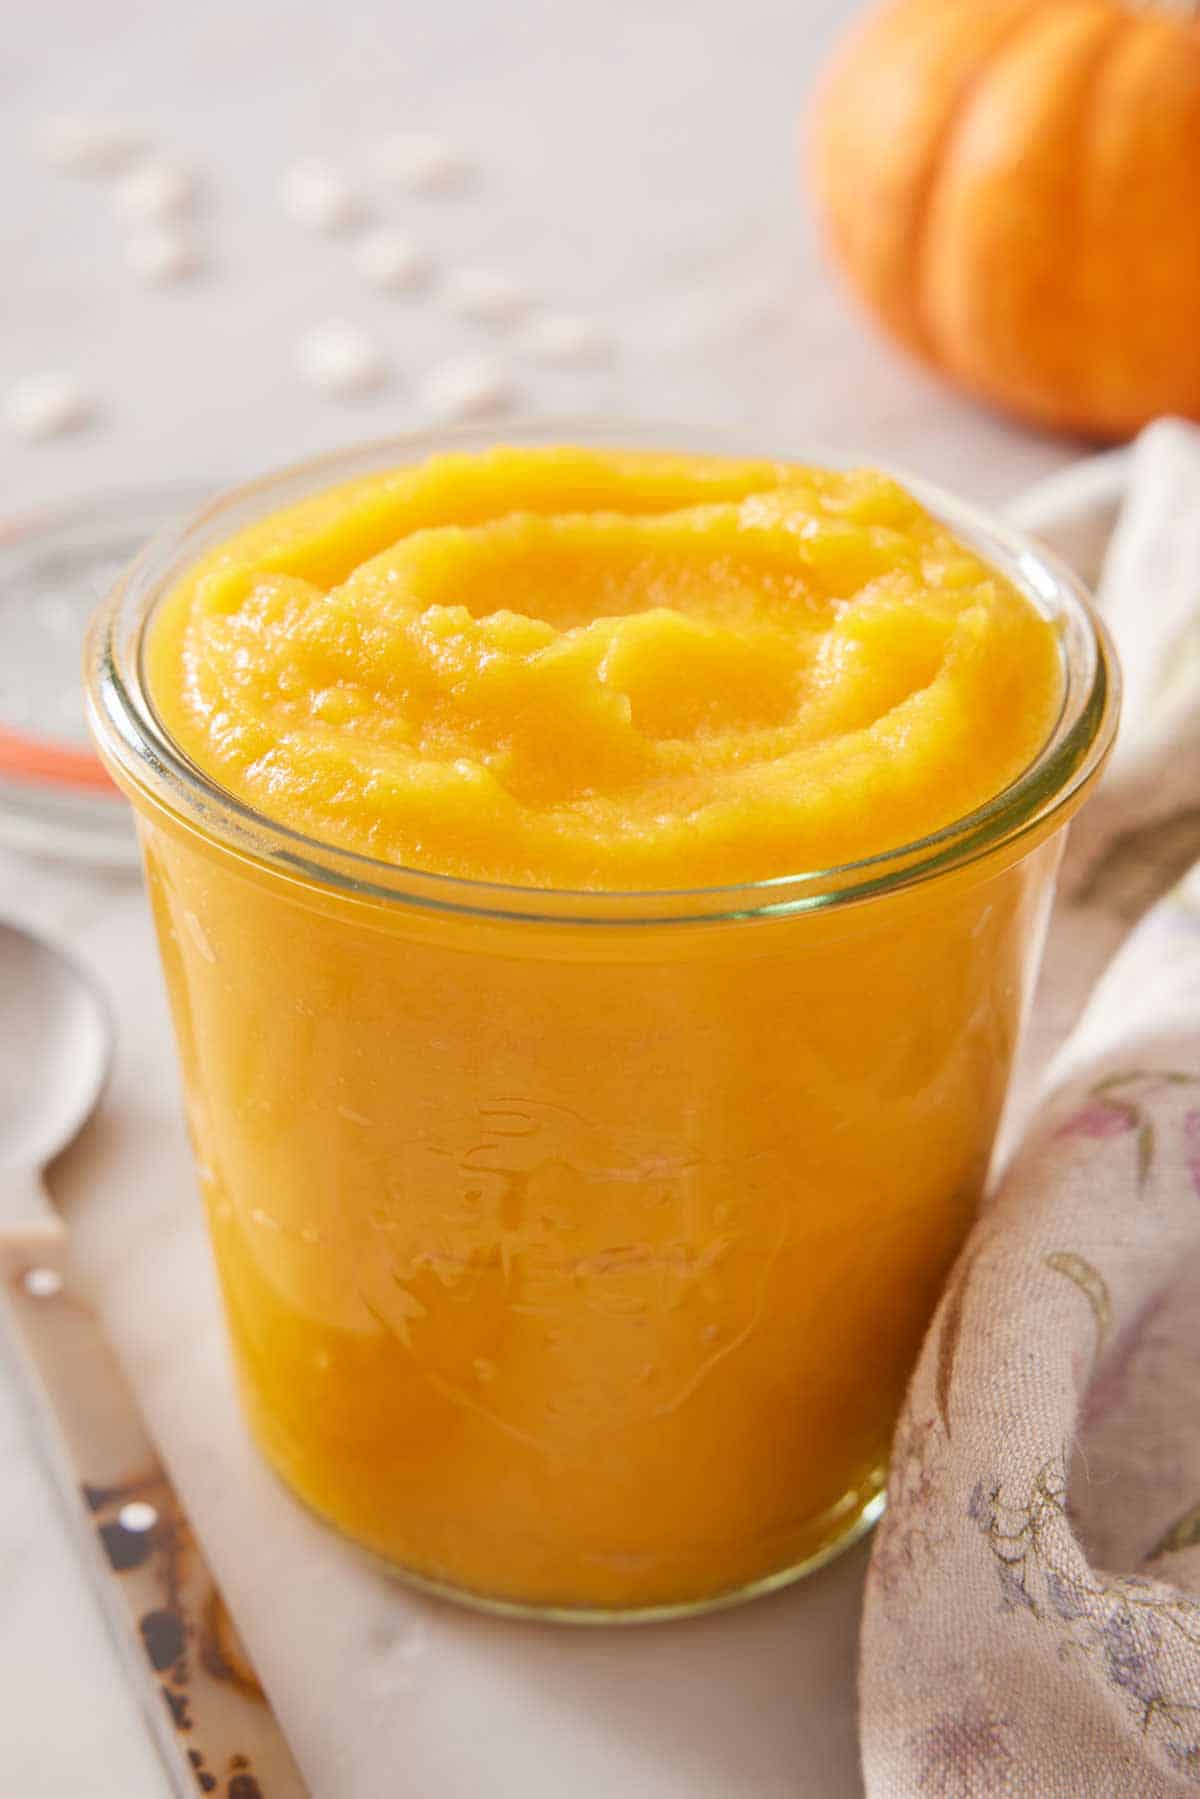 A glass jar of pumpkin puree with a spoon on the side and a pumpkin in the background.